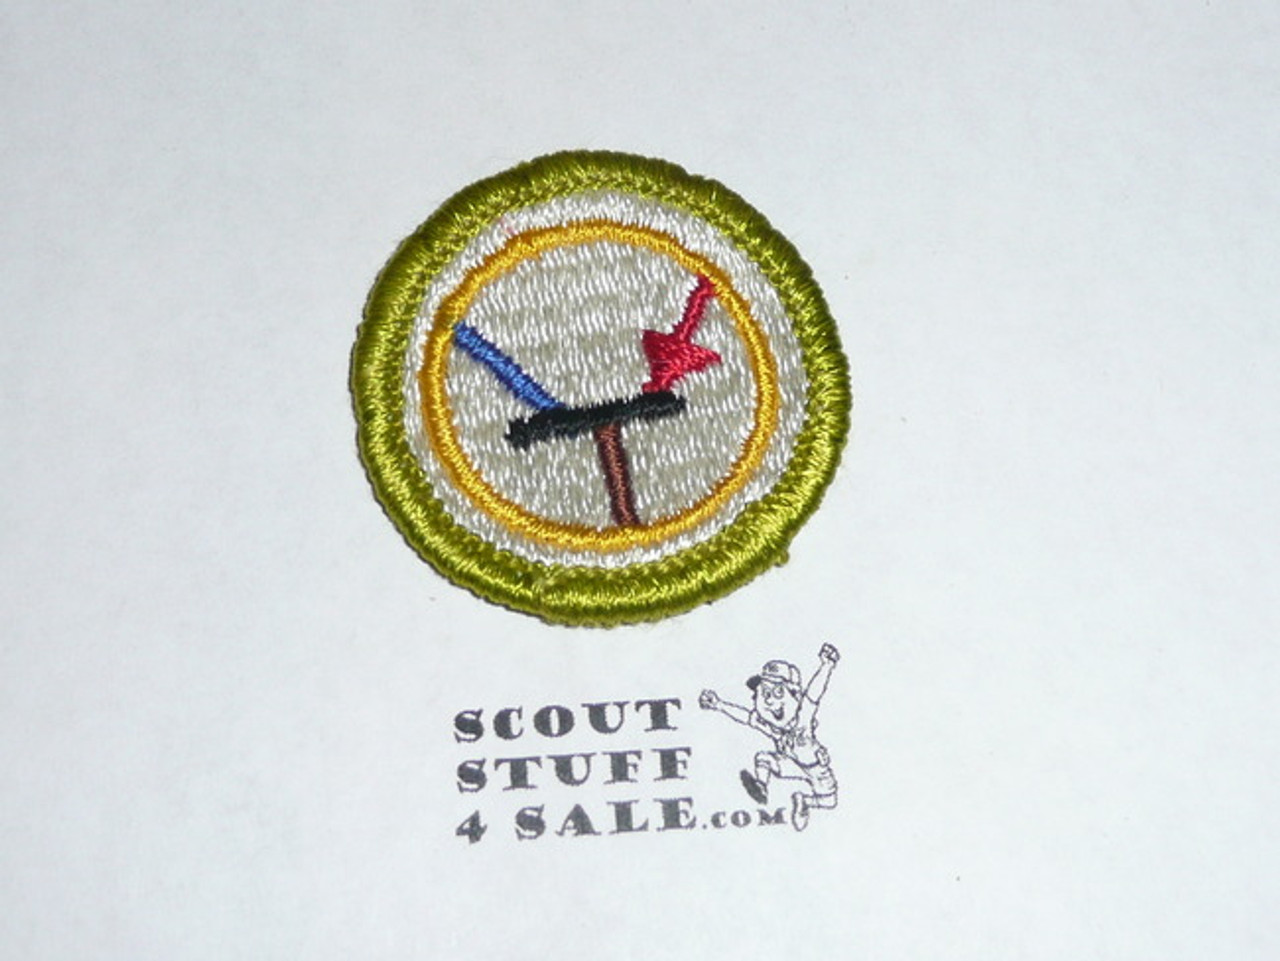 Electronics - Type G - Fully Embroidered Cloth Back Merit Badge (1961-1971)